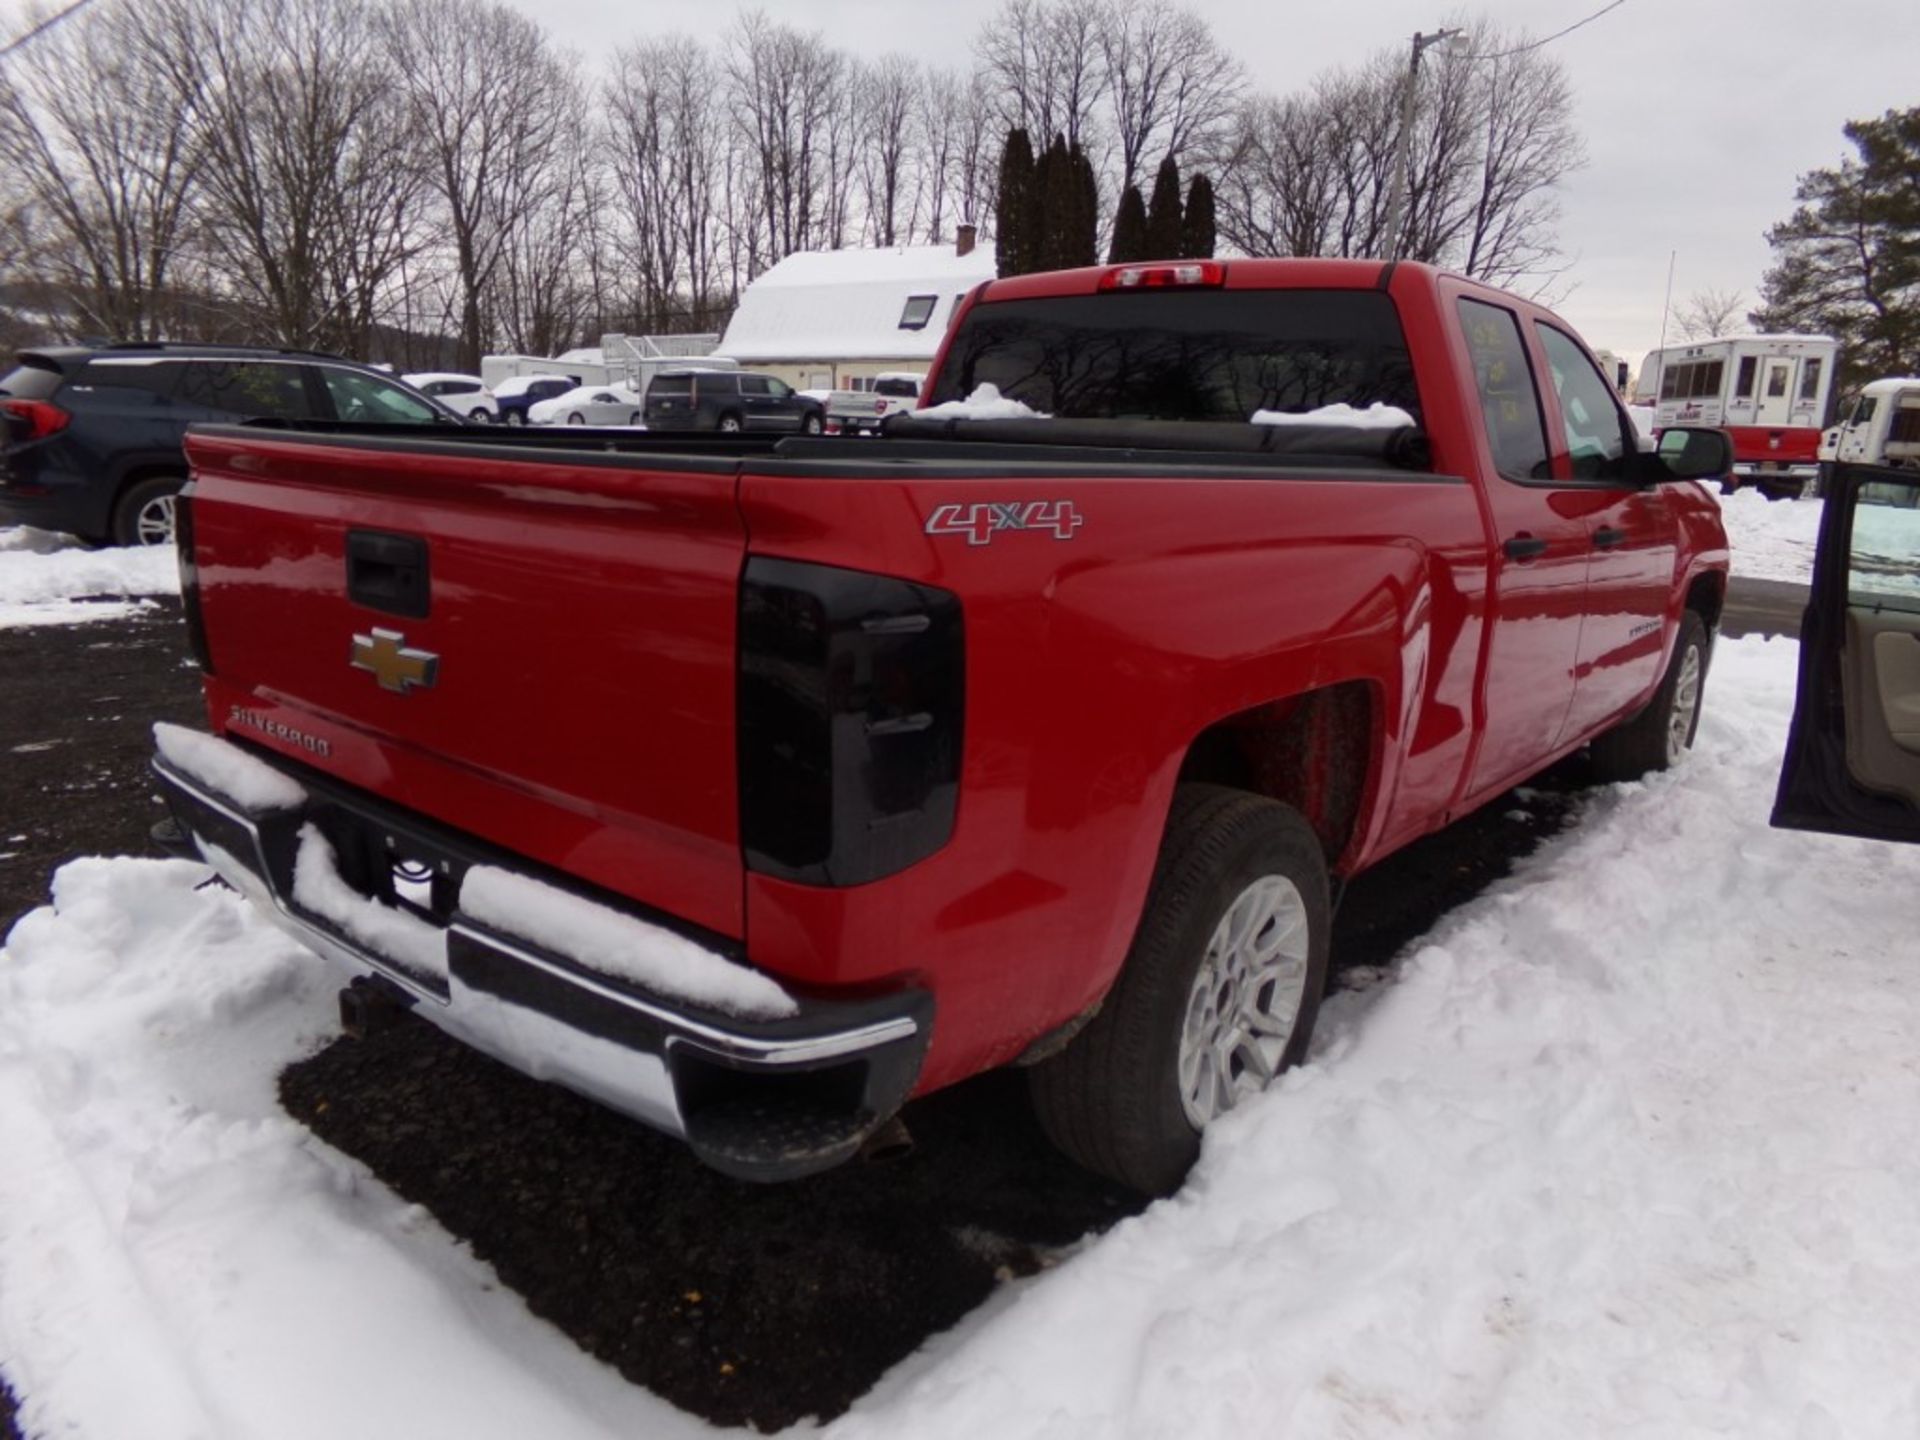 2014 Chevrolet Silverado 1500 4X4, Double Cab, Aftermarket Tail Lights, Toneau Cover, W/T, Red, - Image 3 of 11